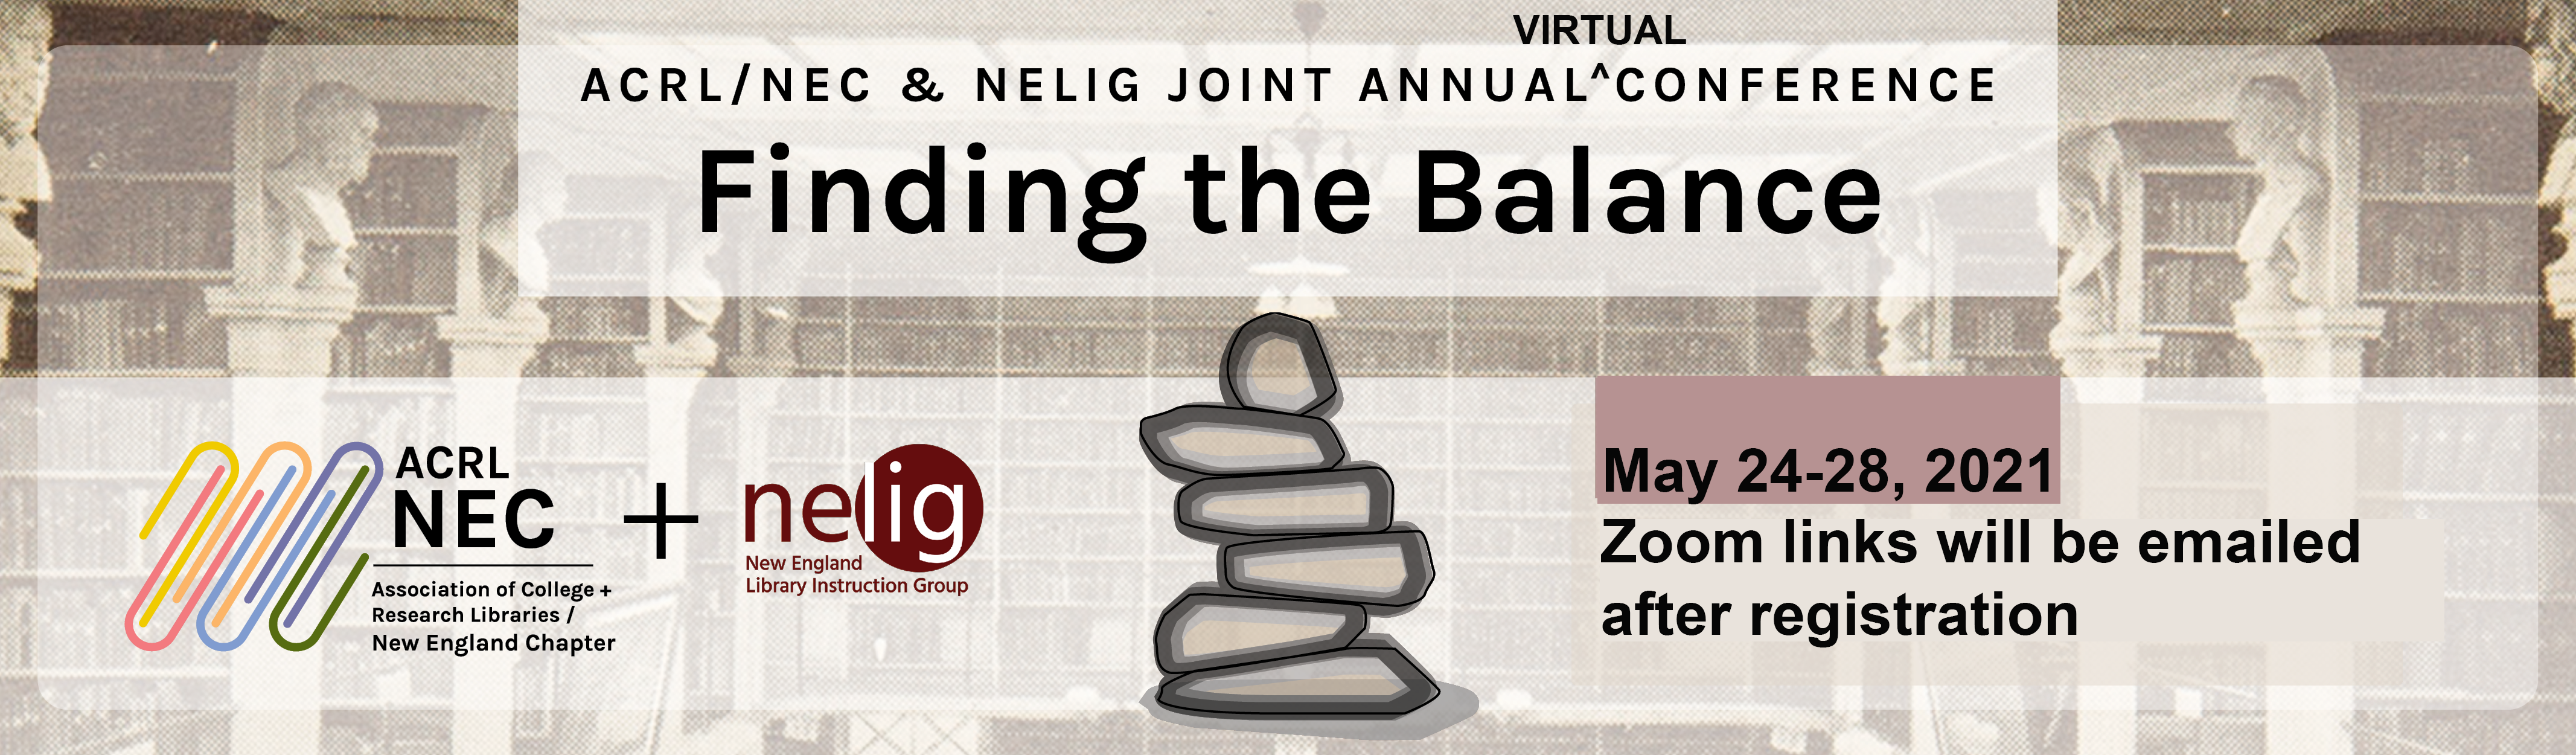 2021 Joint ACRL NEC / NELIG Annual Conference